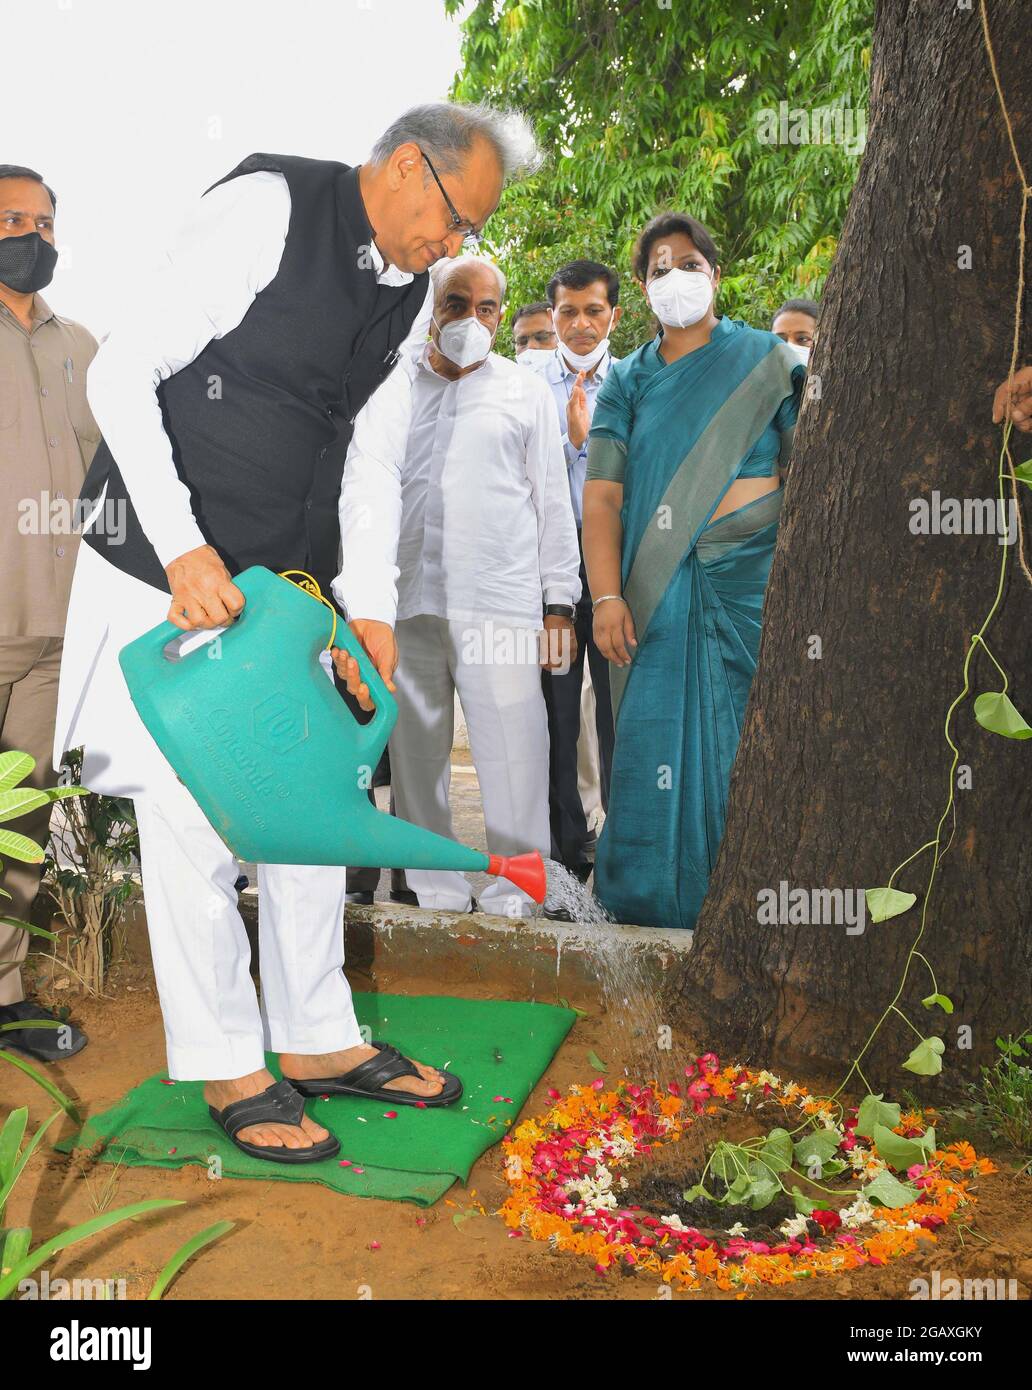 Chief Minister Ashok Gehlot launches door-to-door medicinal plants distribution scheme in Jaipur. Ayurvedic medicines were extensively used to increase immunity of people during Coronavirus pandemic period. Seeing this demand, Rajasthan government will distribute two saplings each of Tulsi, Giloy, Kalmegh and Ashwagandha free of cost to every house in the state. (Photo by Sumit Saraswat/Pacific Press) Stock Photo